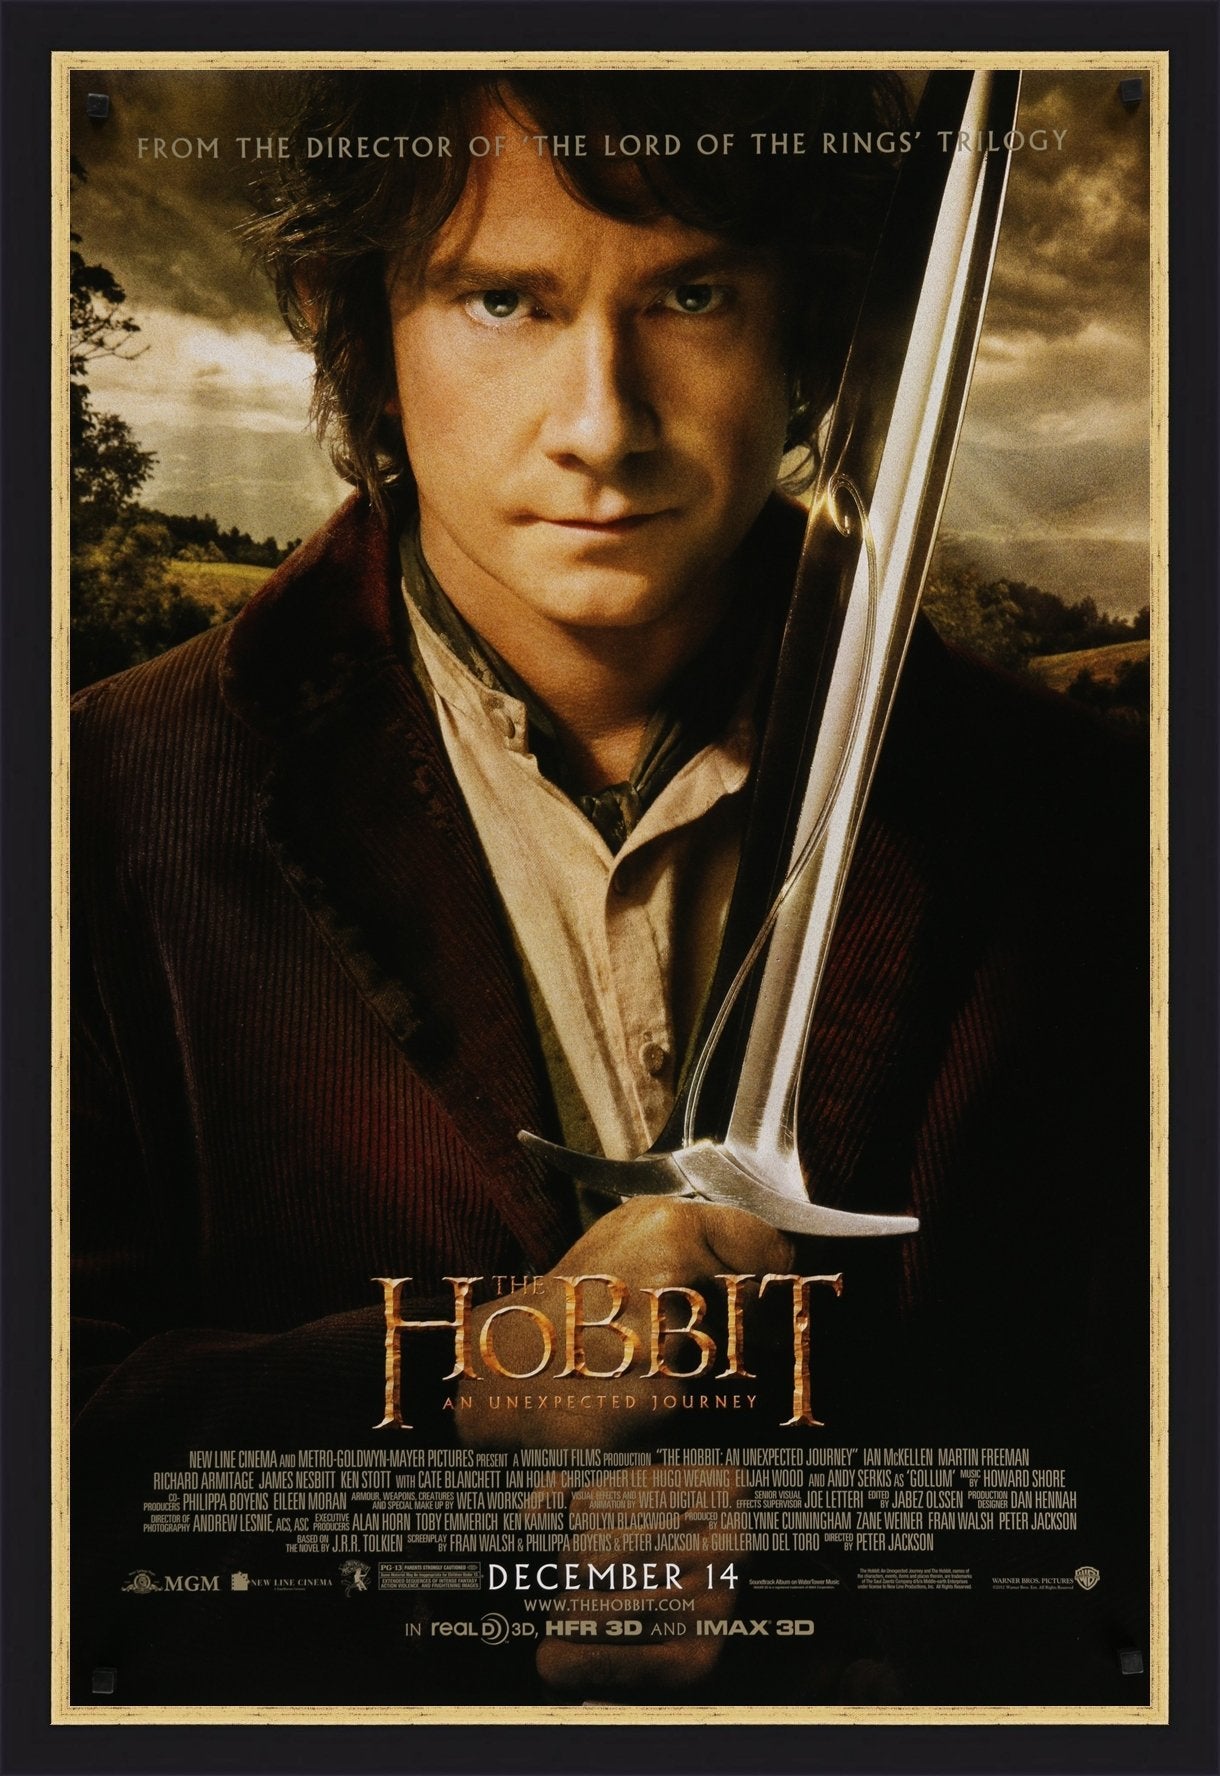 An original movie poster for the film The Hobbit